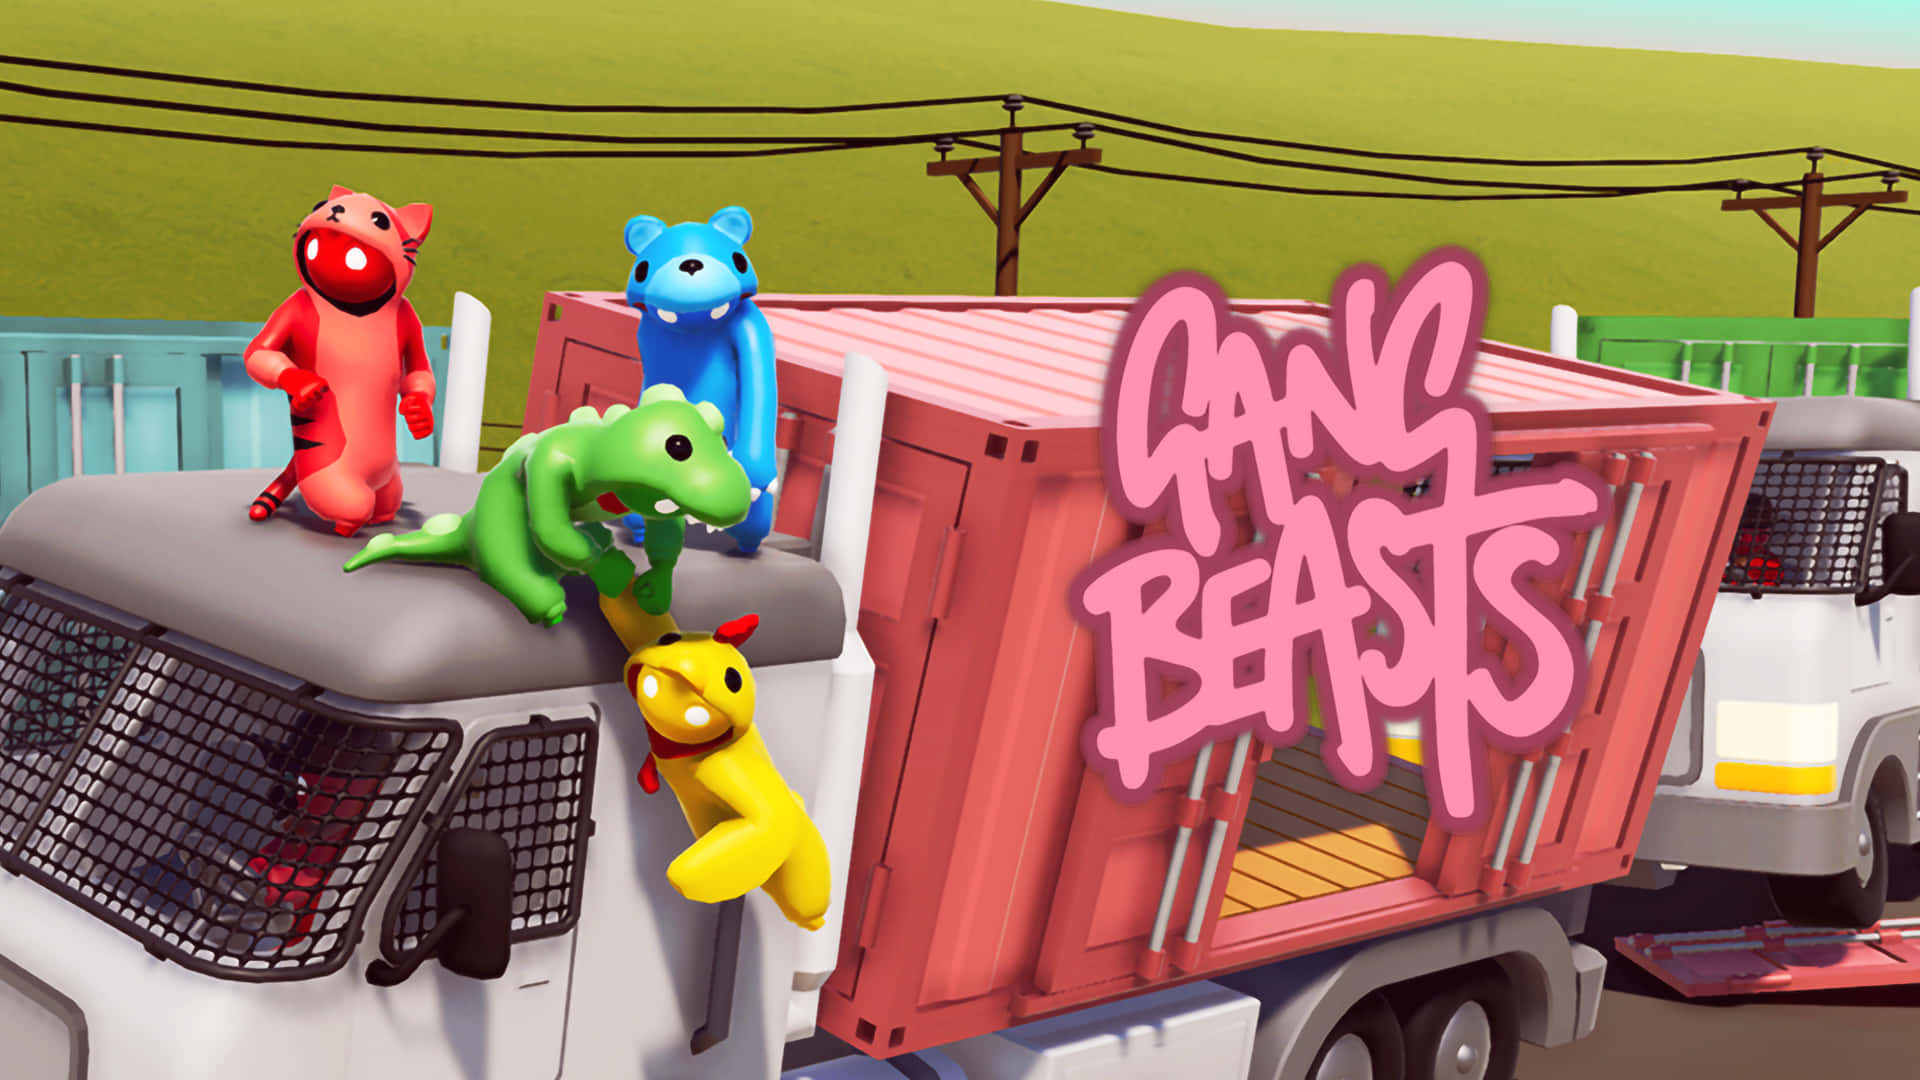 Get ready for epic battles in Gang Beast! Wallpaper